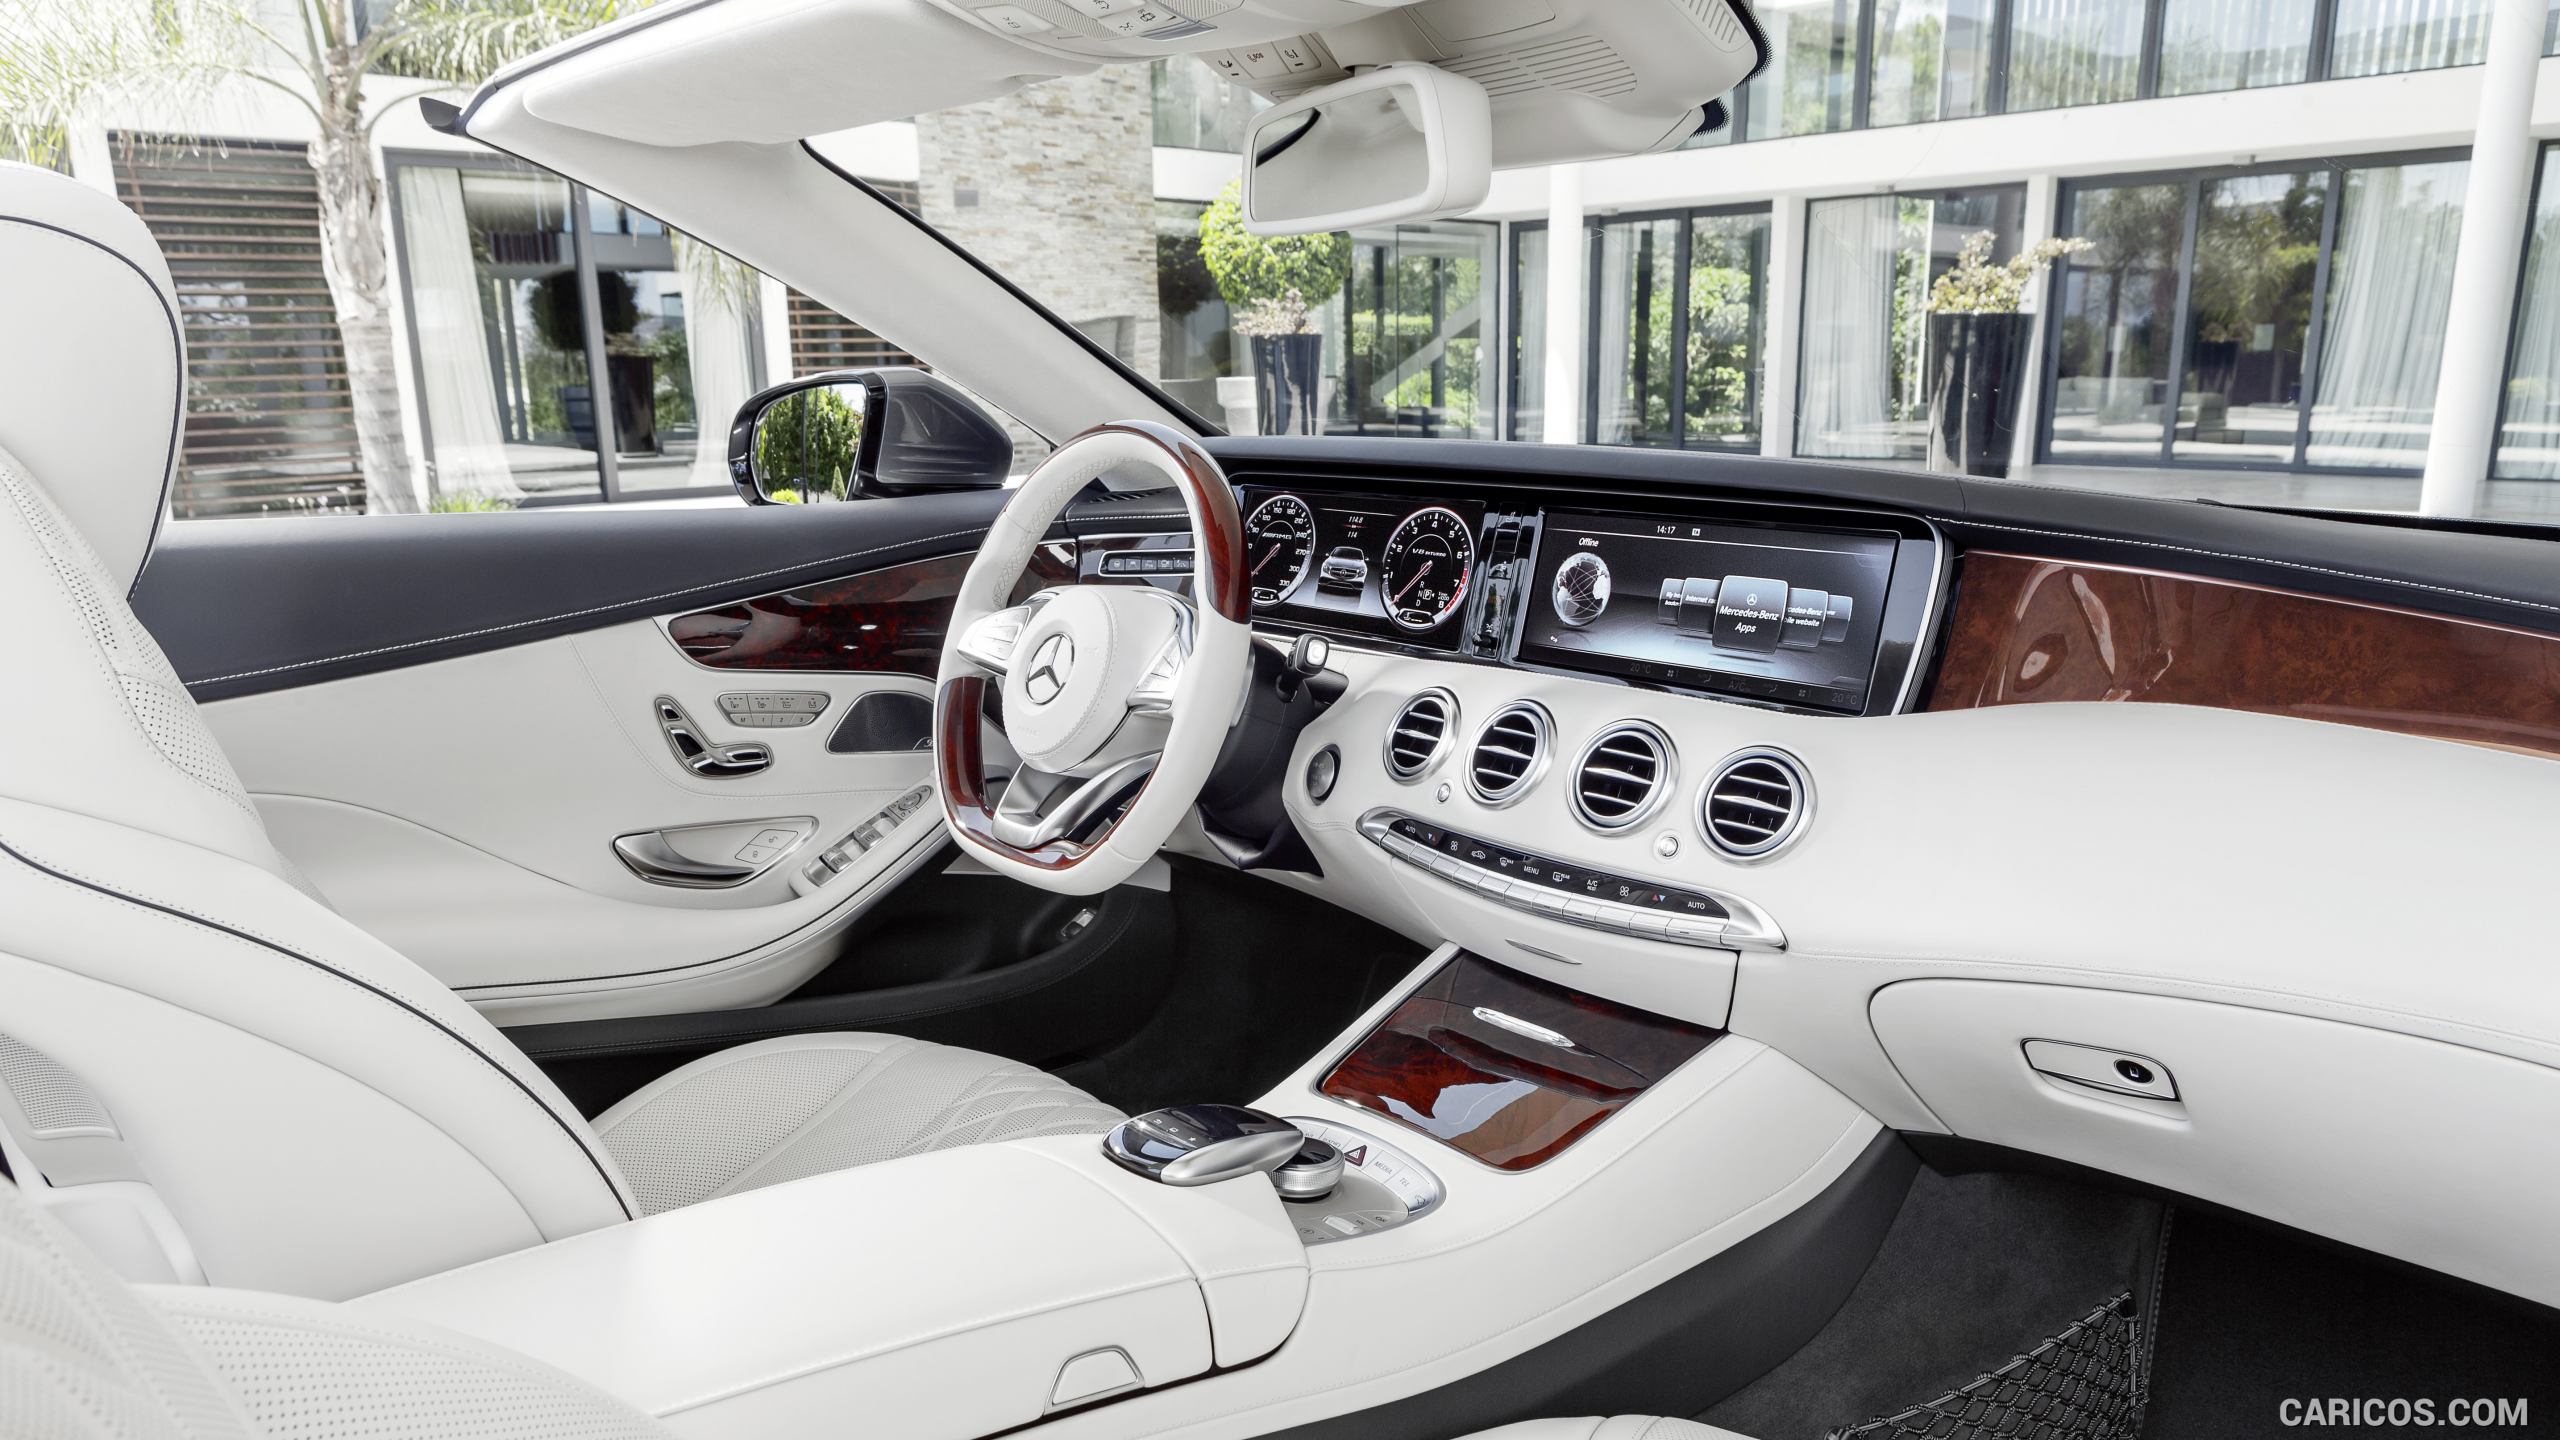 2017 Mercedes-Benz S-Class S500 Cabriolet (Leather Porcelain / Deep-Sea Blue) - Interior Dashboard, #20 of 56